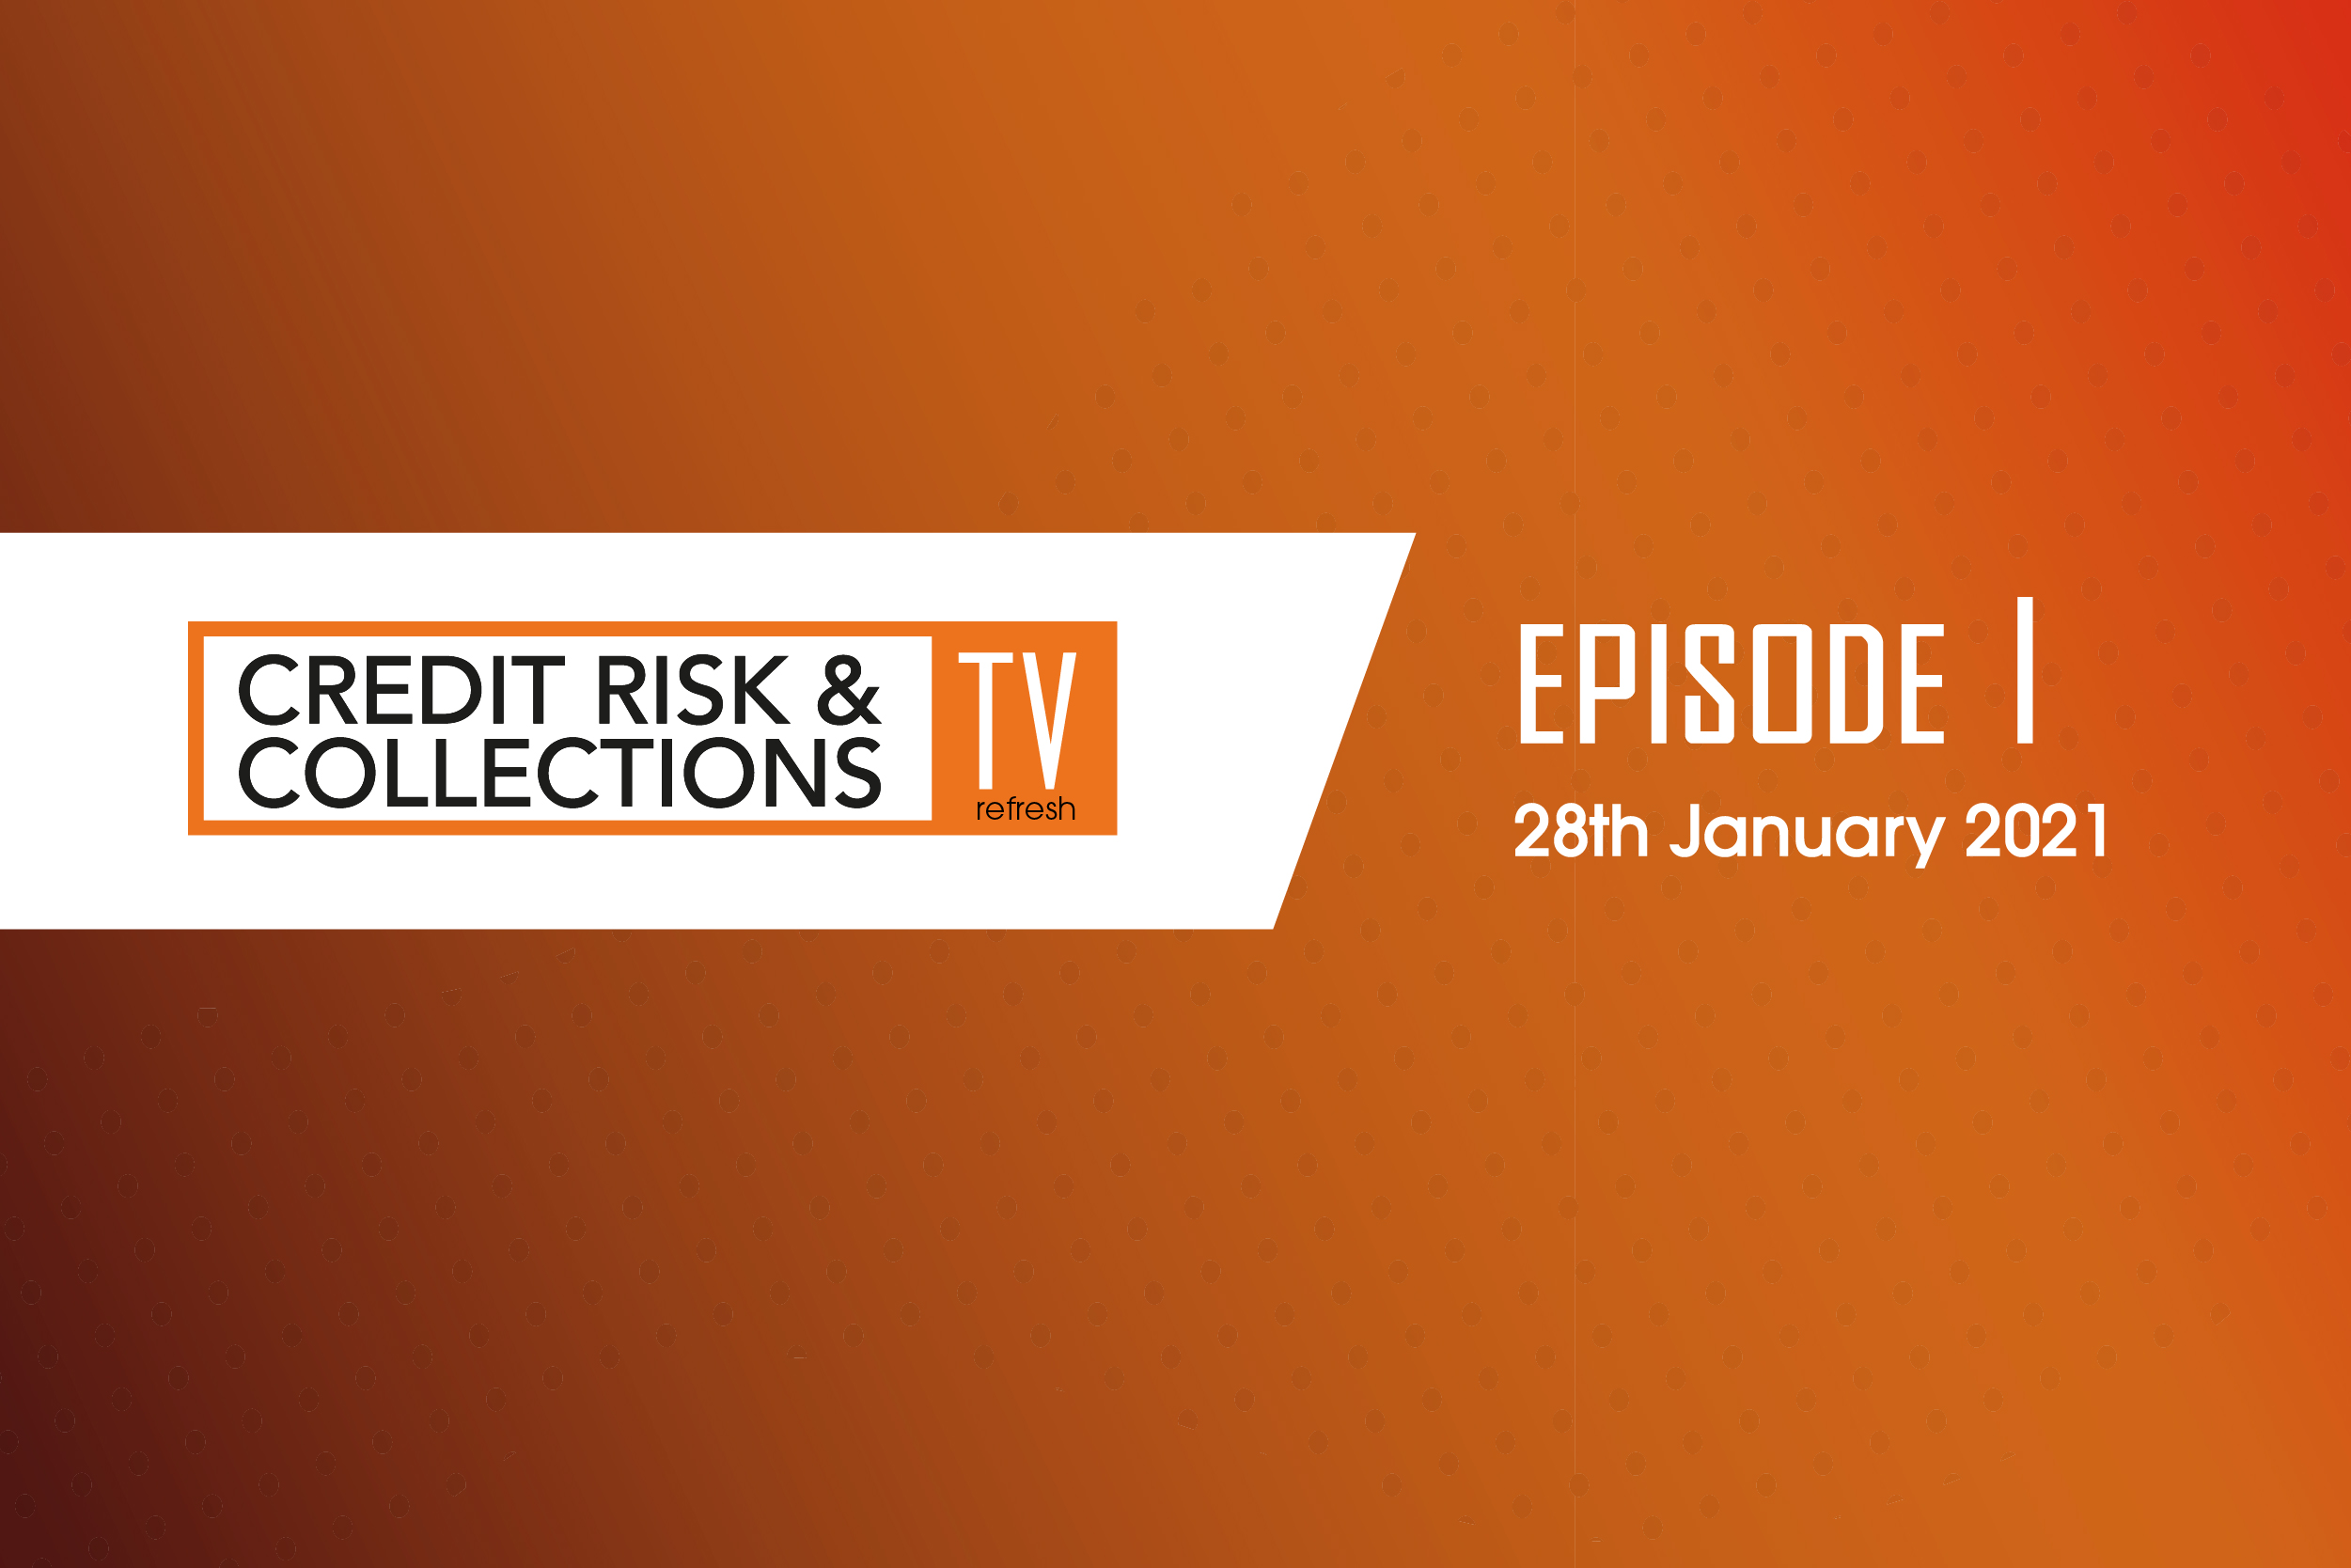 Credit Risk &amp; Vulnerability Refresh - Episode 1 - Credit risk and strategy insight   /   Preparing for Breathing Space